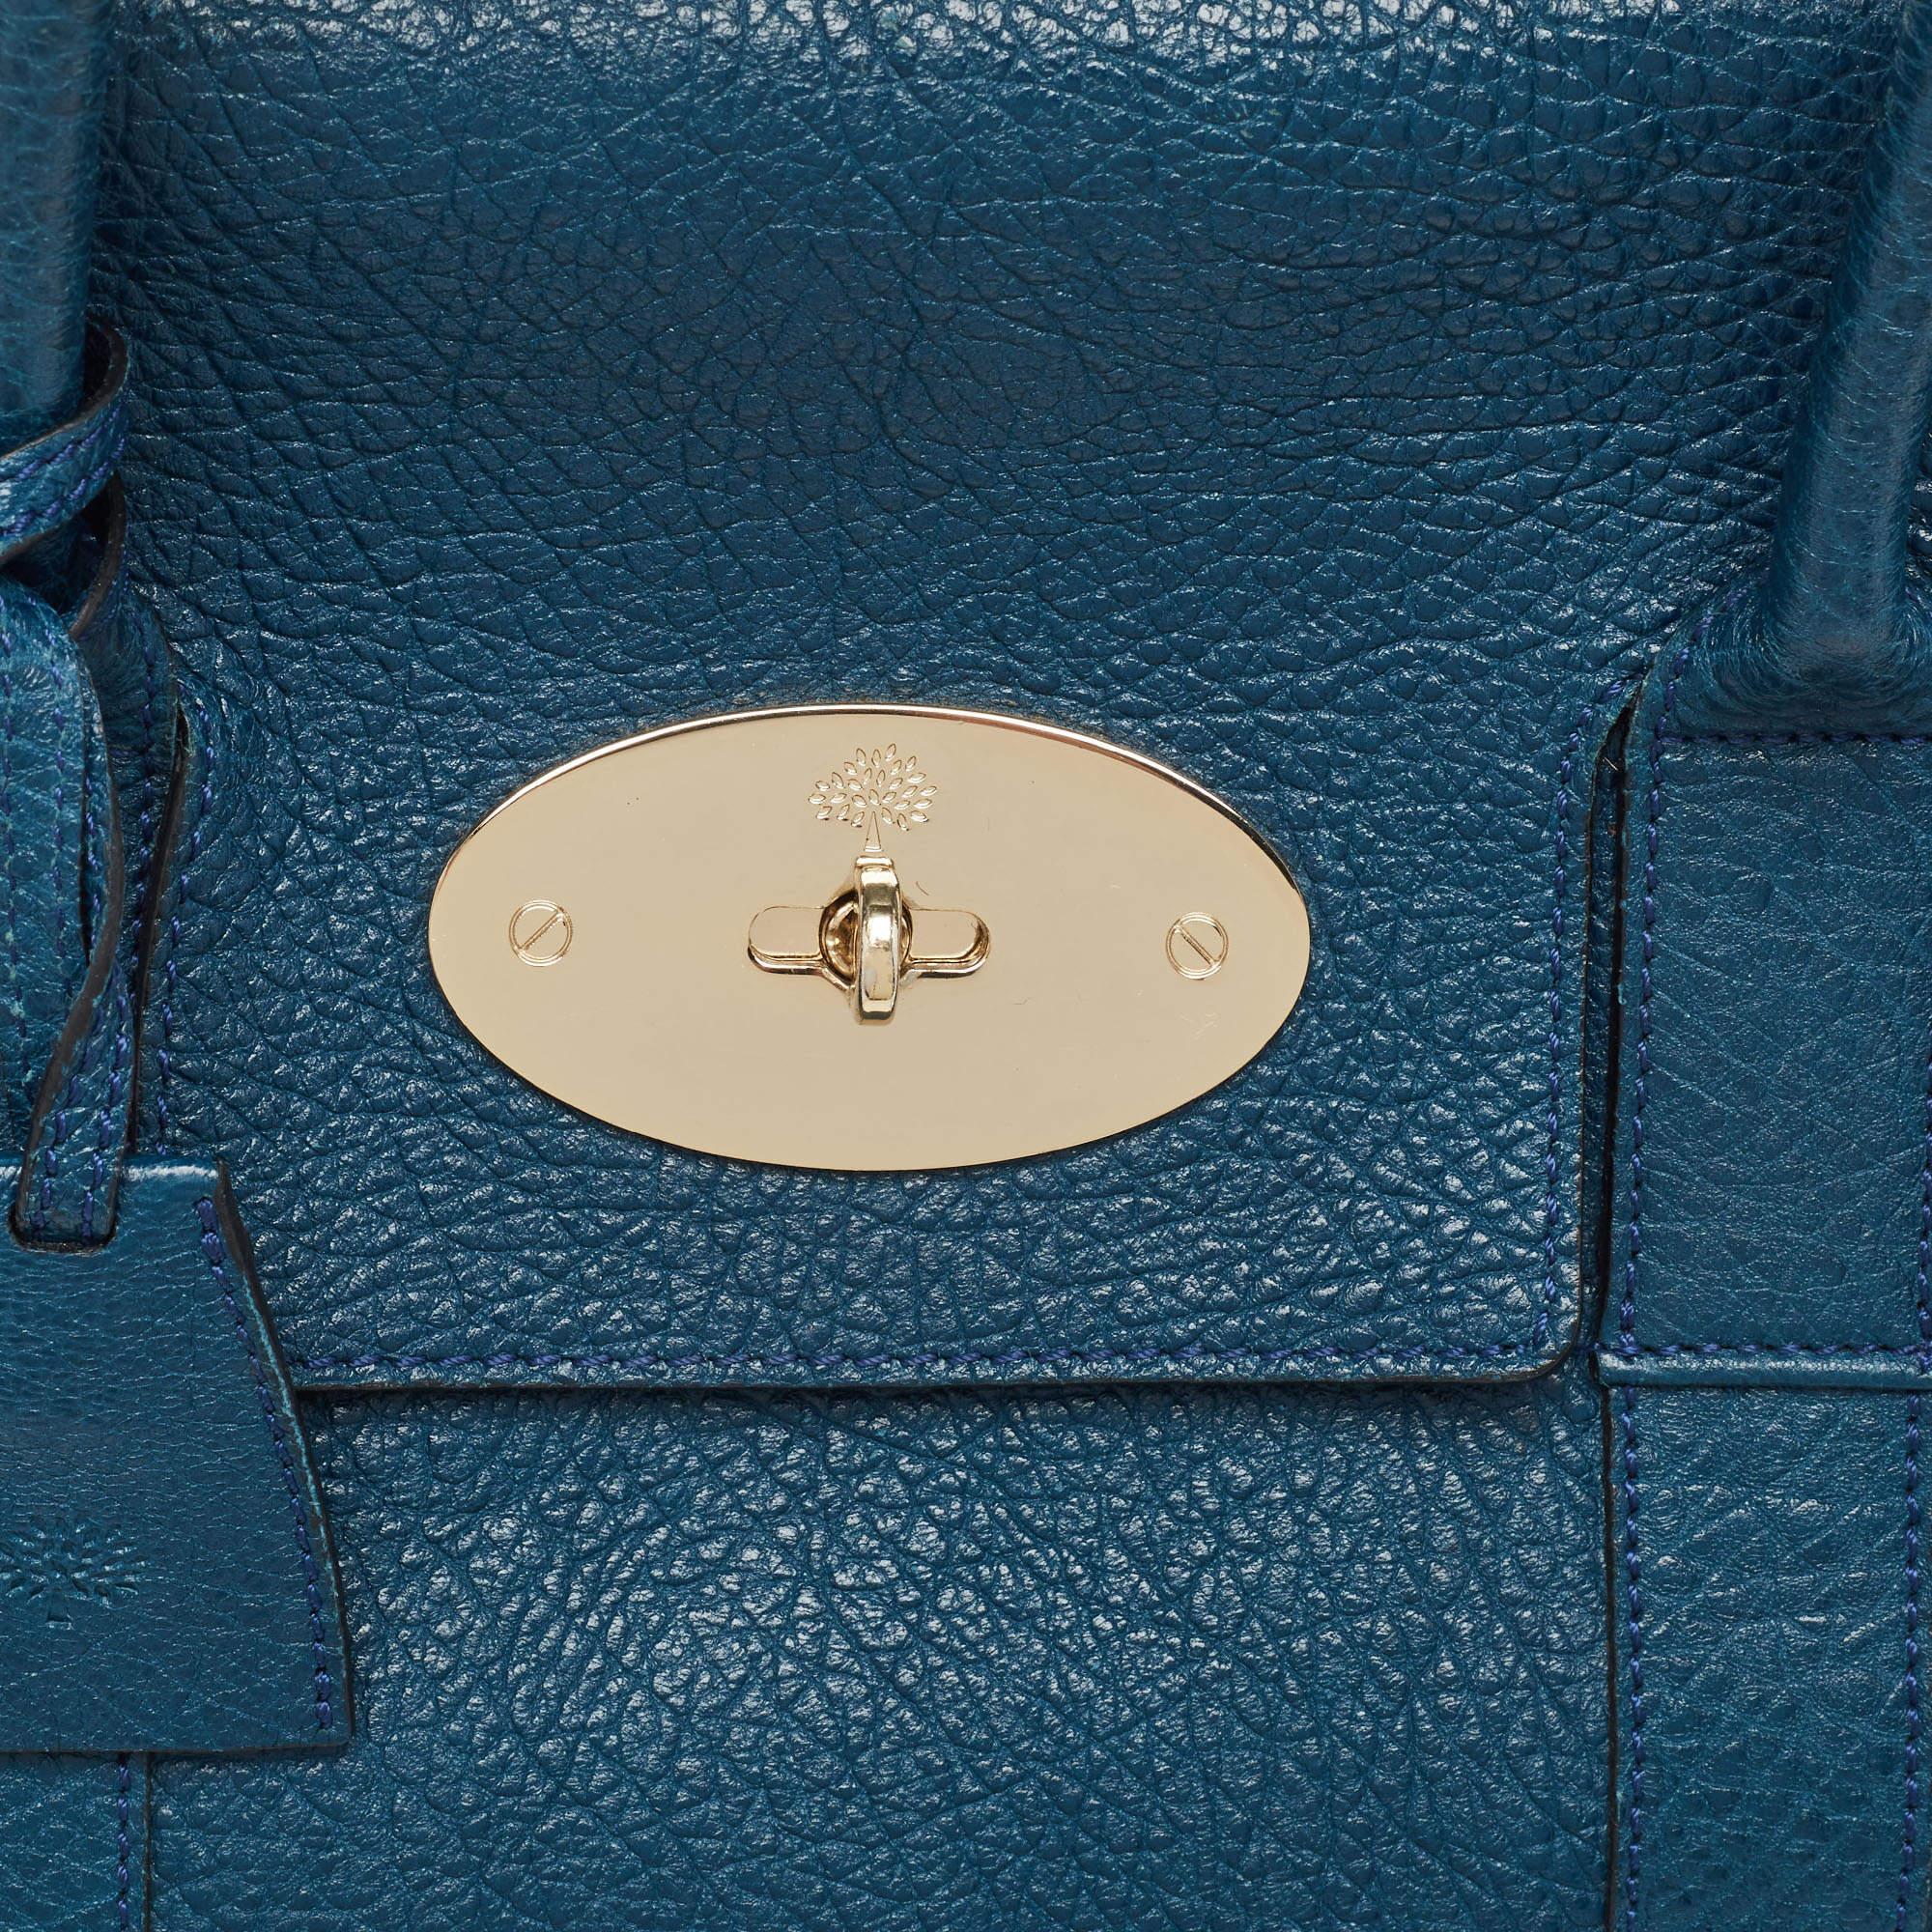 Mulberry Teal Blue Leather Bayswater Satchel For Sale 6